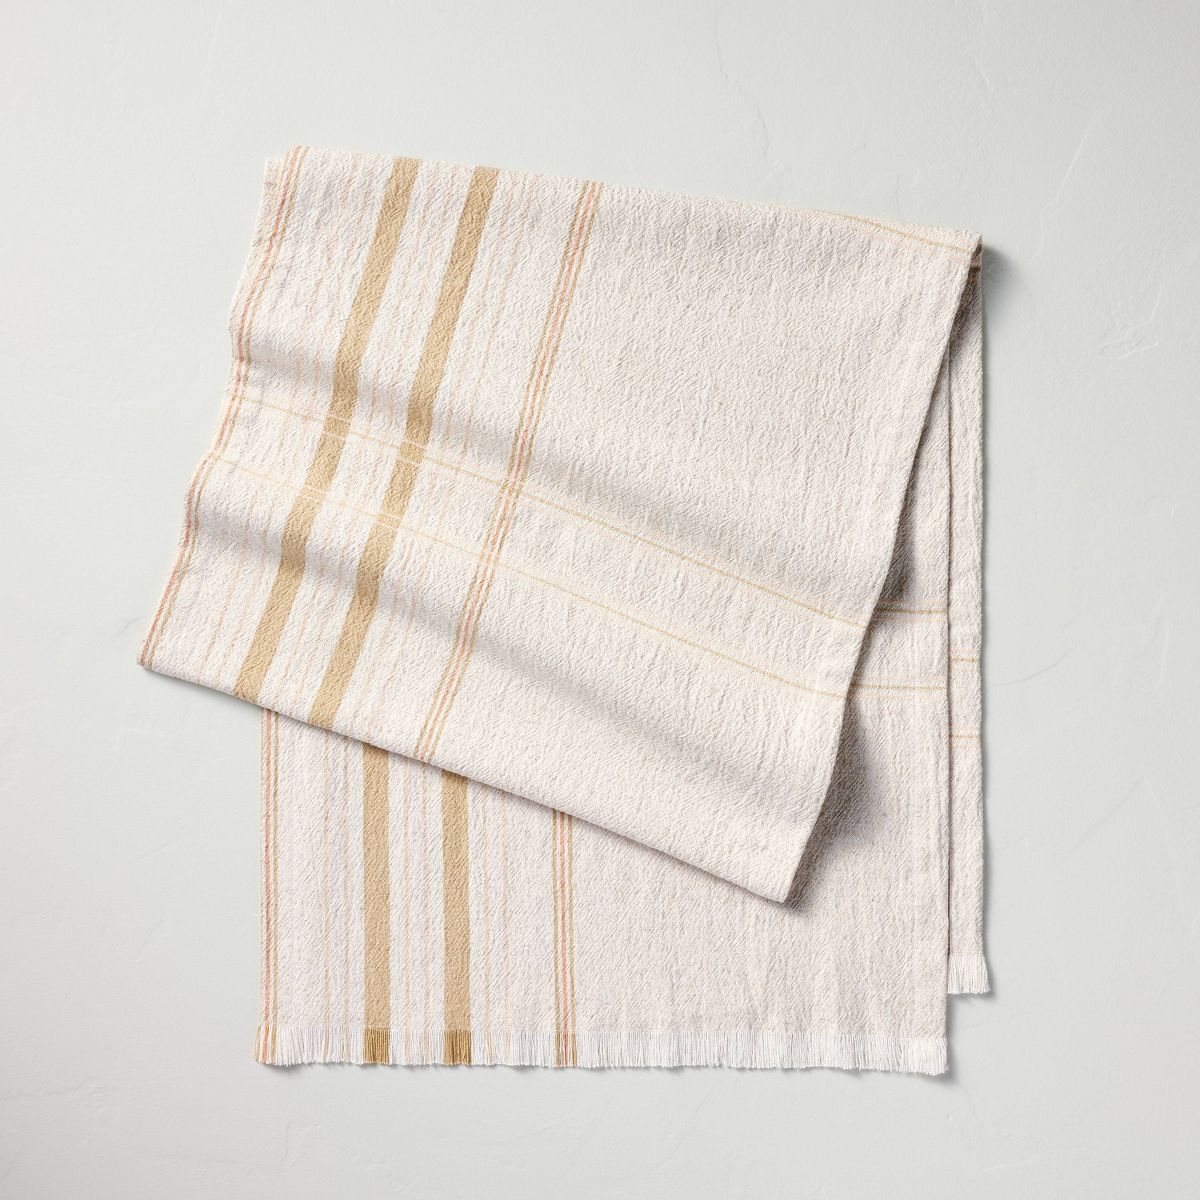 20"x90" Offset Plaid Woven Table Runner Light Tan/Blush - Hearth & Hand™ with Magnolia | Target